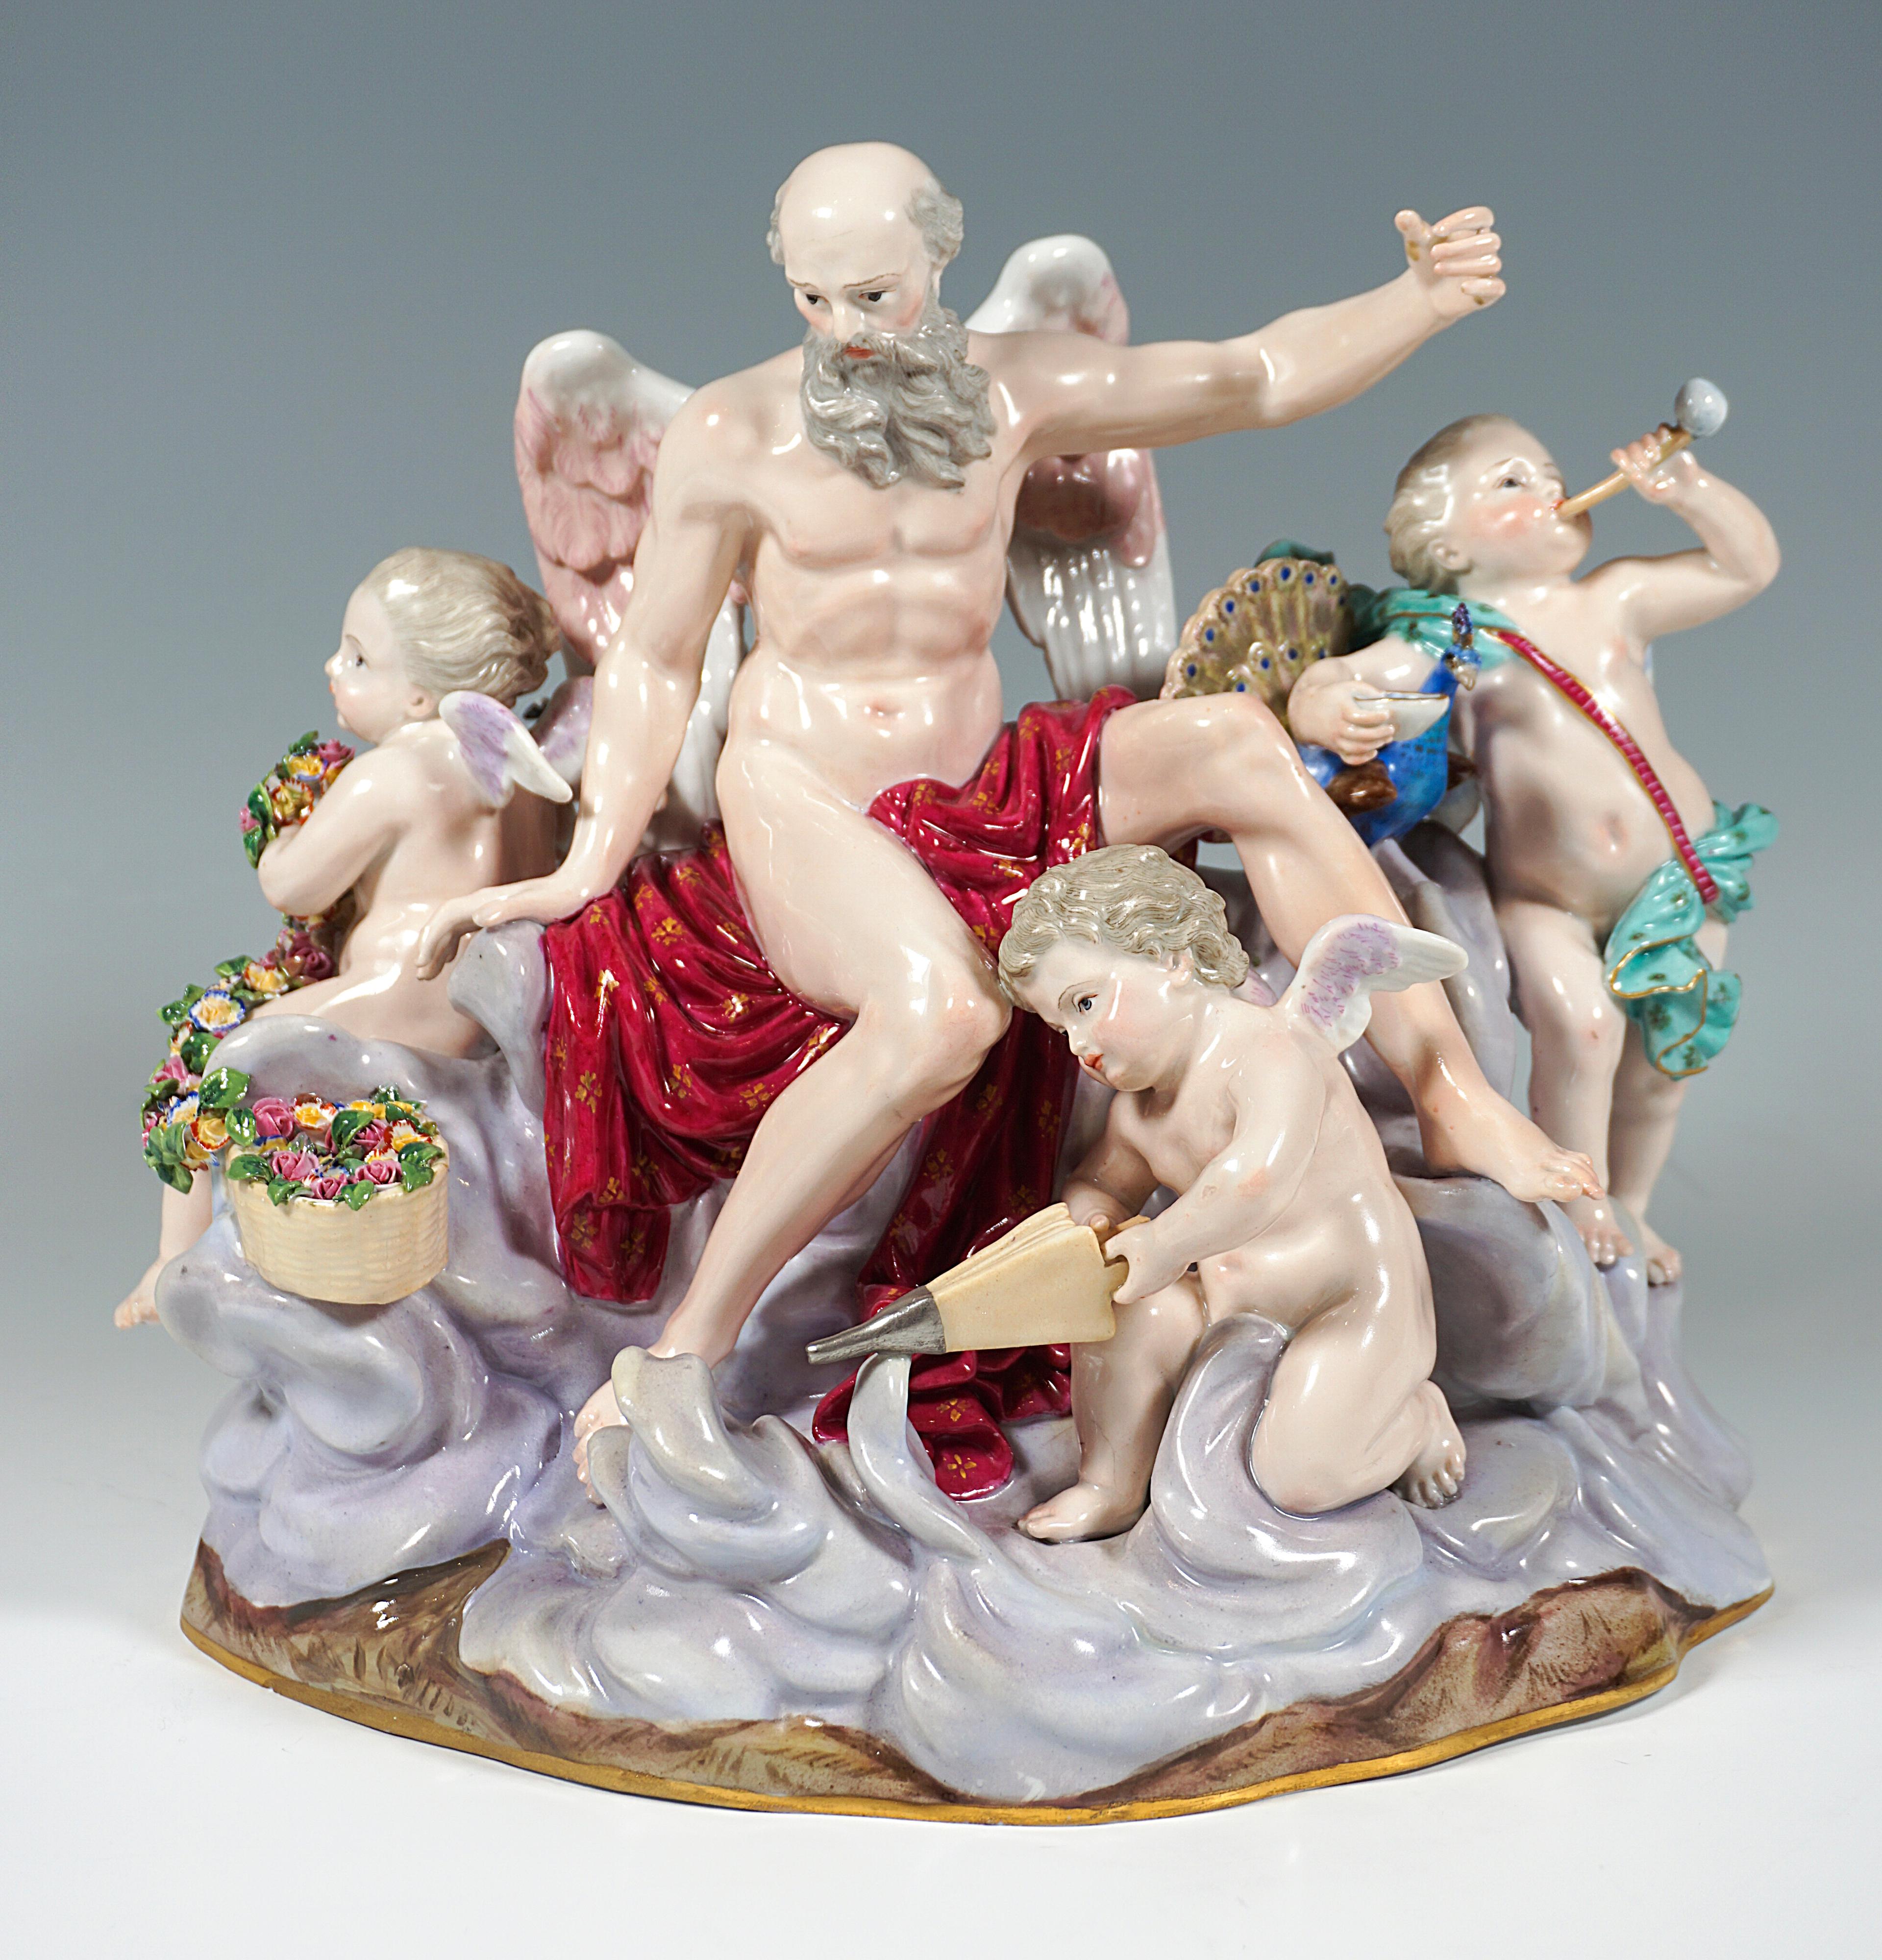 Excellent Meissen porcelain group of the 19th century:
Depiction of a bearded old man with angel wings, covered only with a cloth, sitting in the middle of a mountain of clouds, probably Chronos from Greek mythology, symbolizing the passage of life